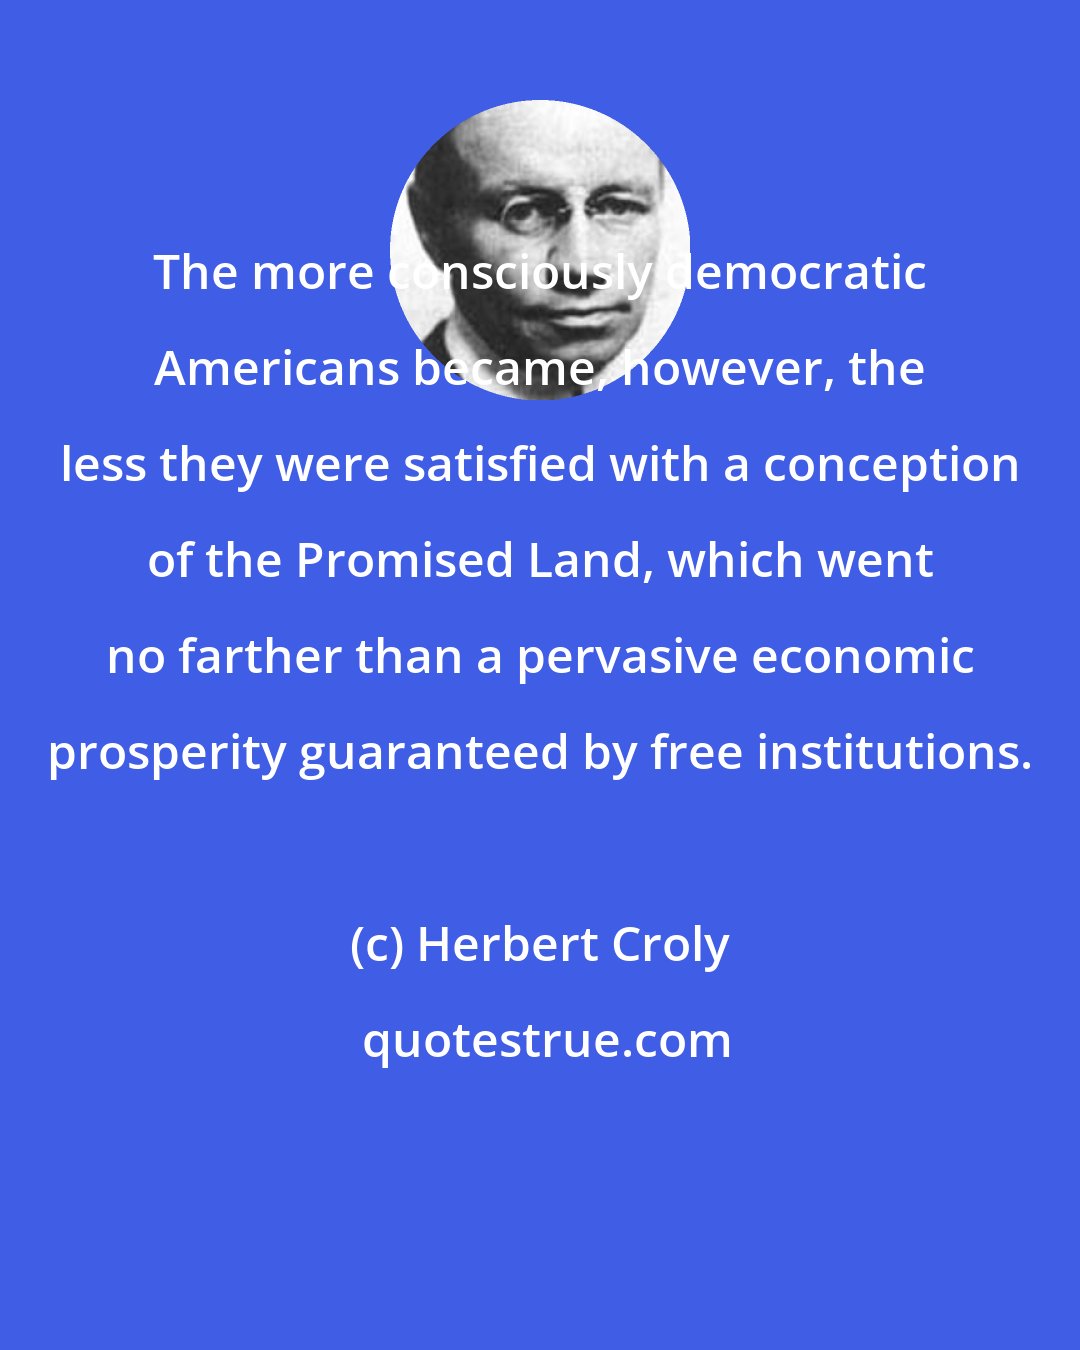 Herbert Croly: The more consciously democratic Americans became, however, the less they were satisfied with a conception of the Promised Land, which went no farther than a pervasive economic prosperity guaranteed by free institutions.